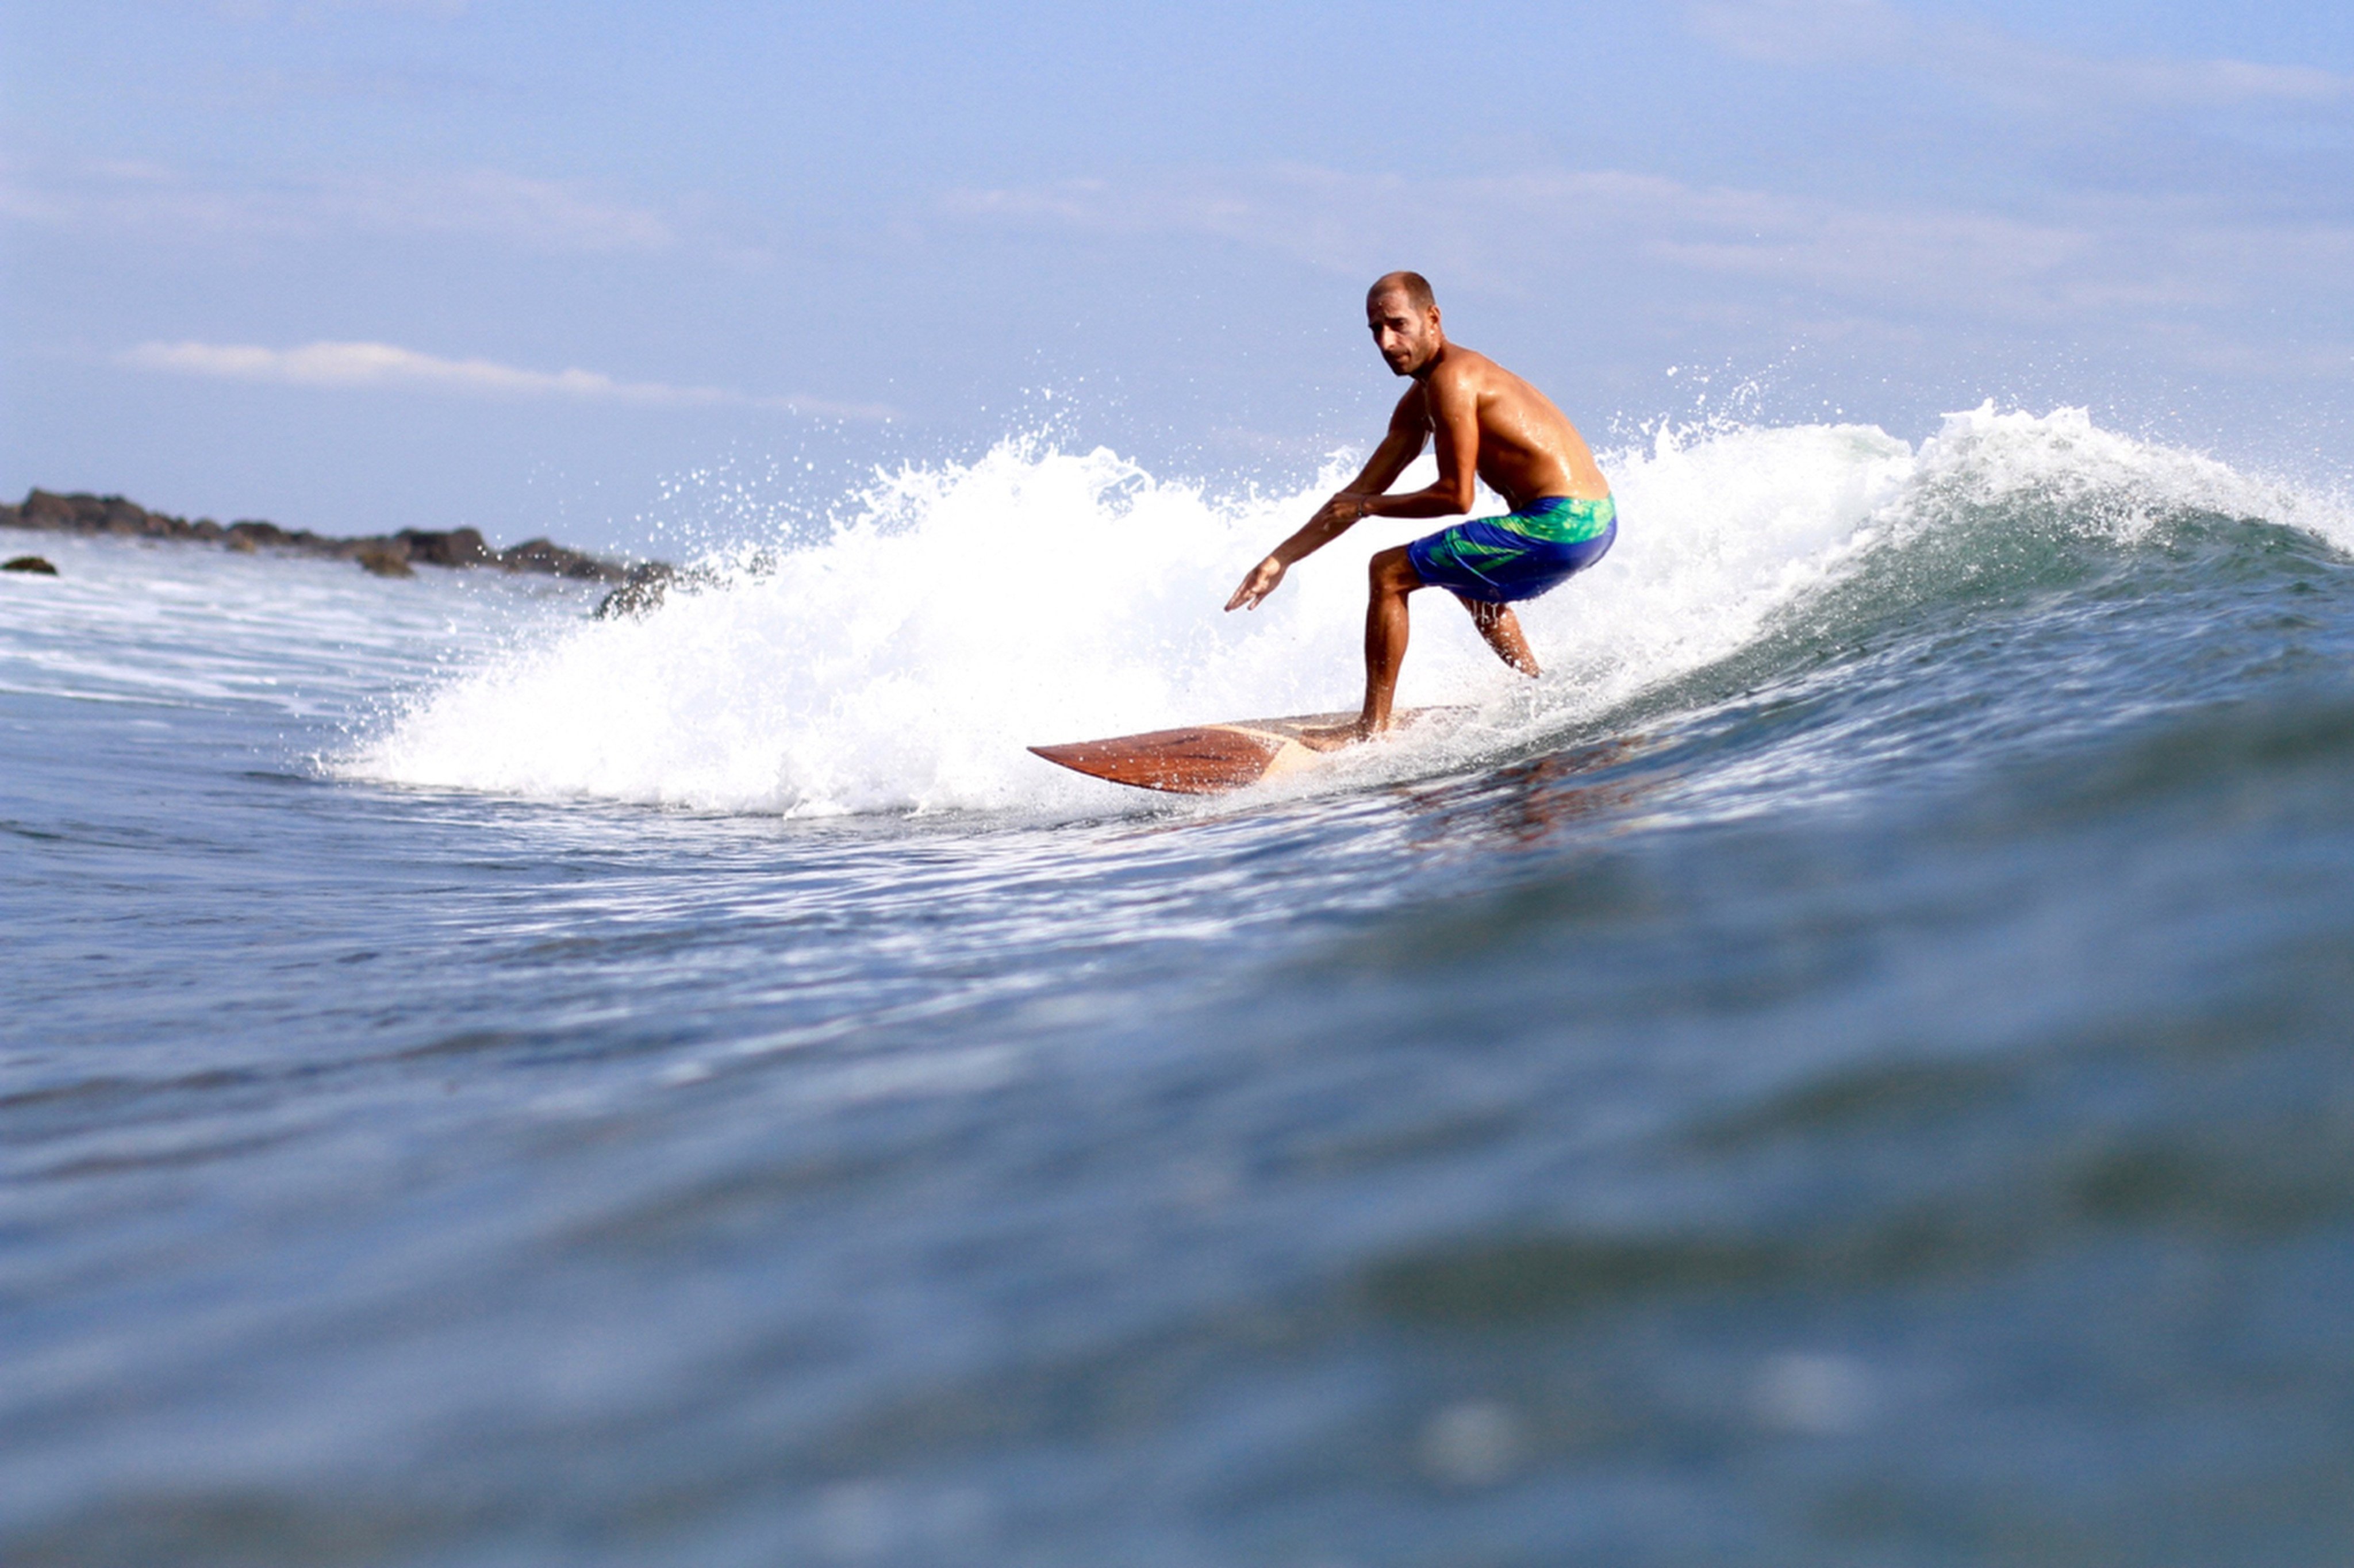 Mike Holzrichter, the former manager of a homestay in Medewi, surfs off the village in Bali. Photo: Mike Holzrichter